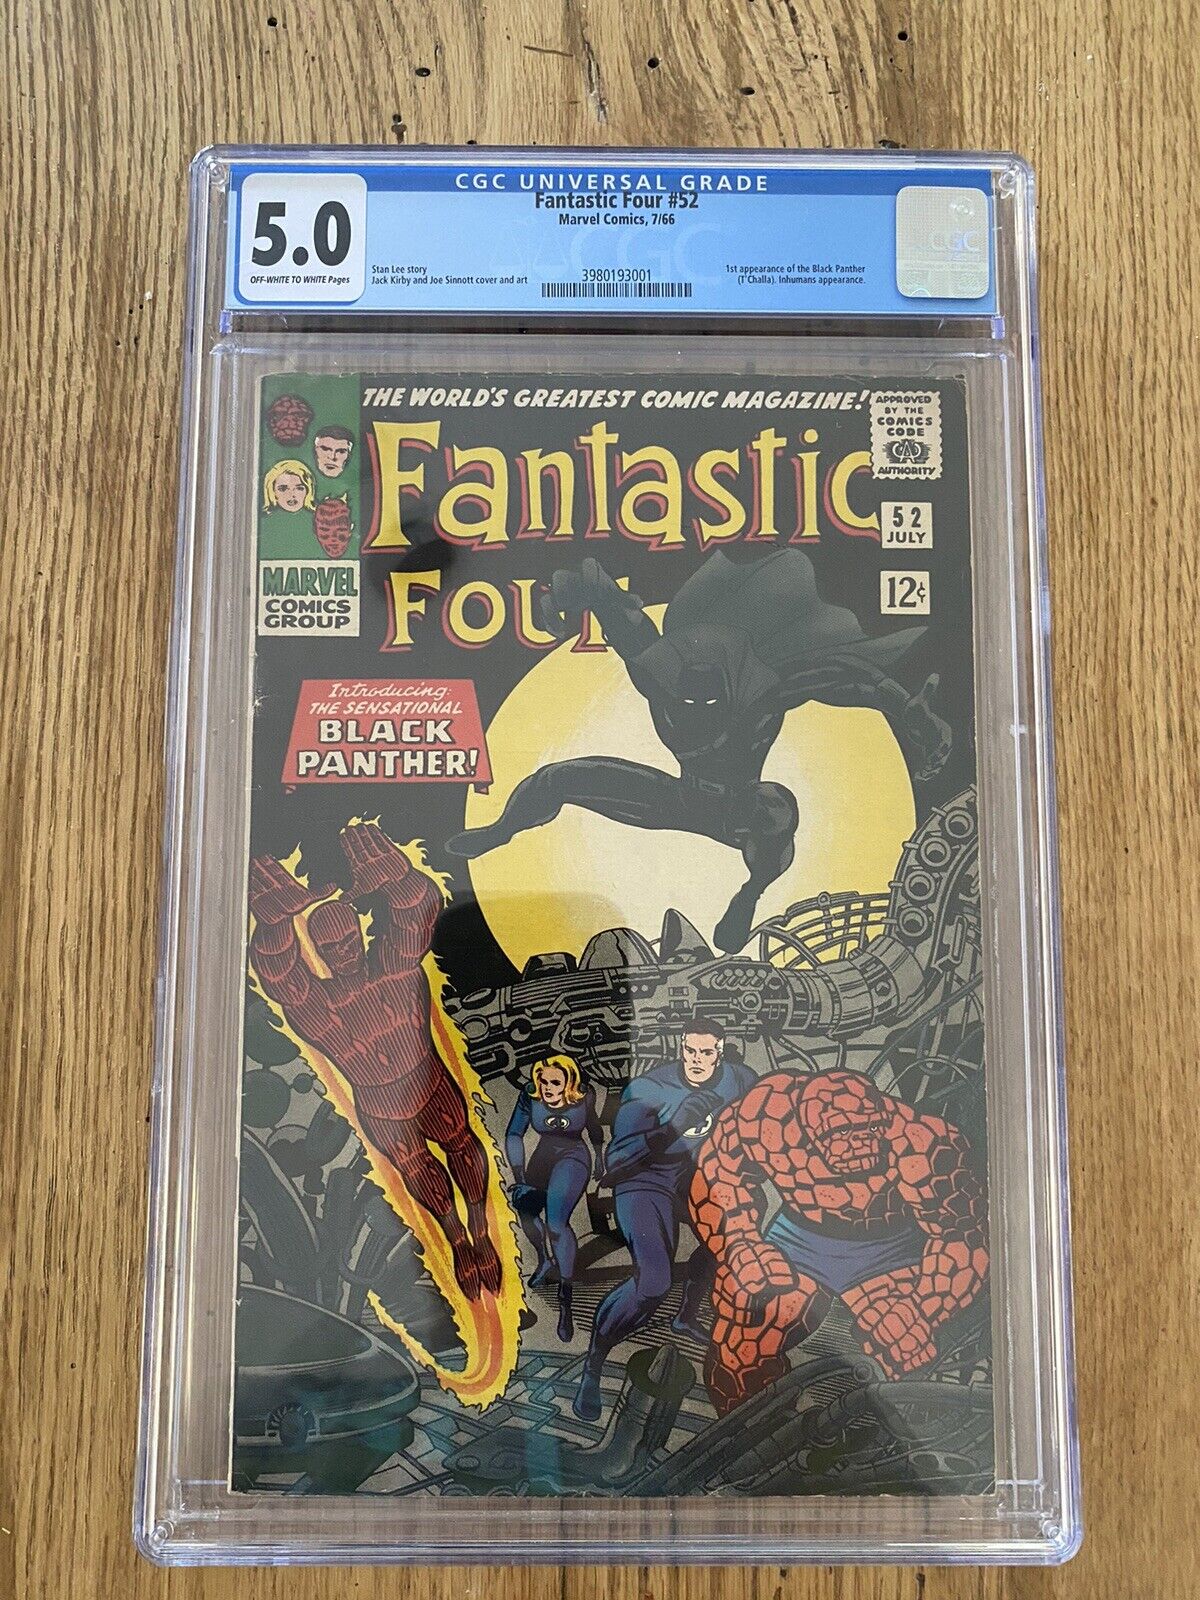 Fantastic Four #52 CGC 5.0 - First Appearance Of Black Panther